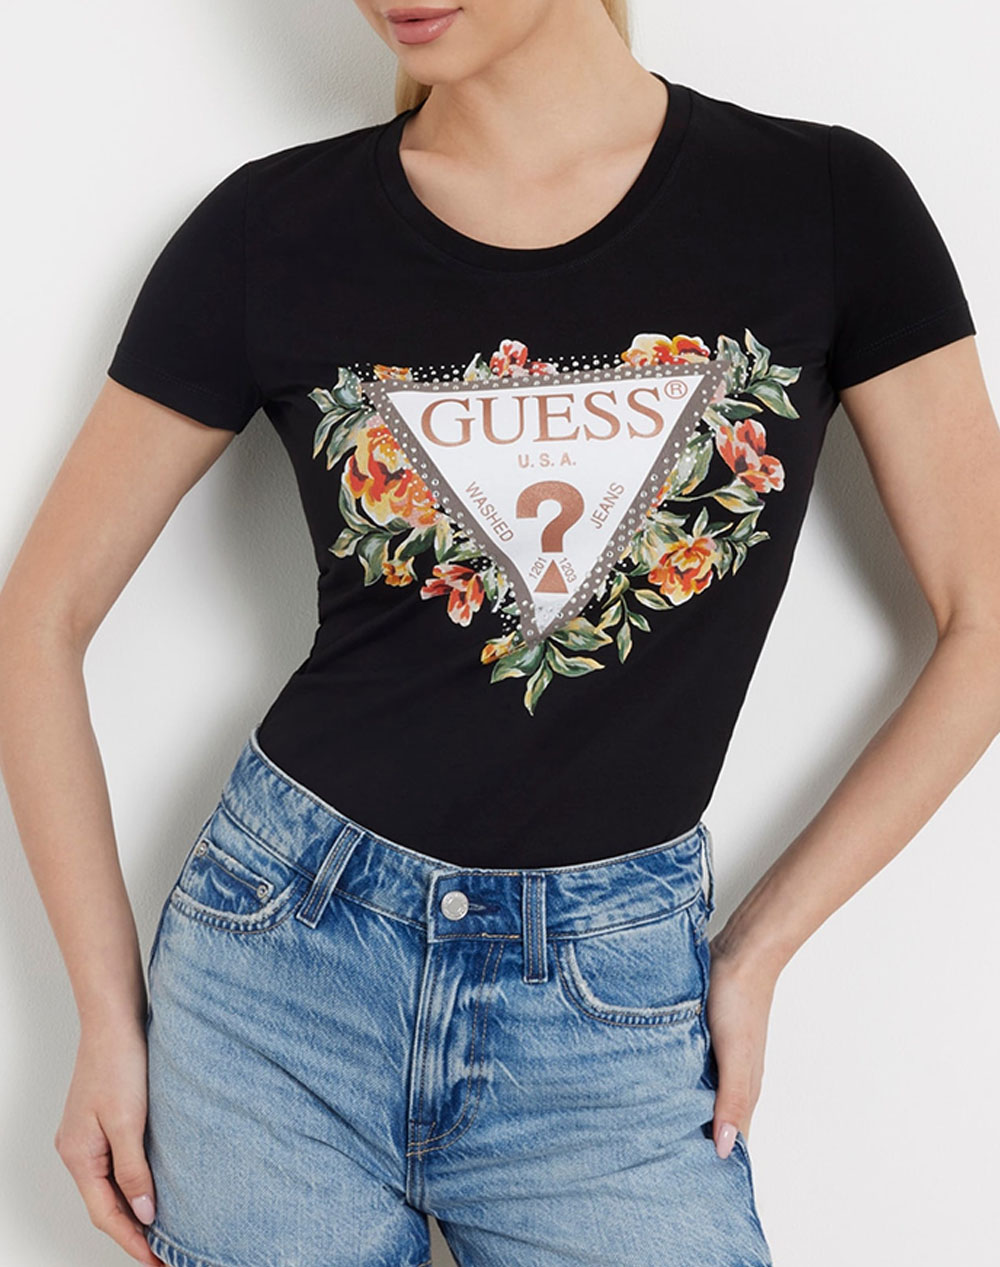 GUESS SS CN TRIANGLE FLOWERS TEE ΜΠΛΟΥΖΑ ΓΥΝΑΙΚΕΙΟ